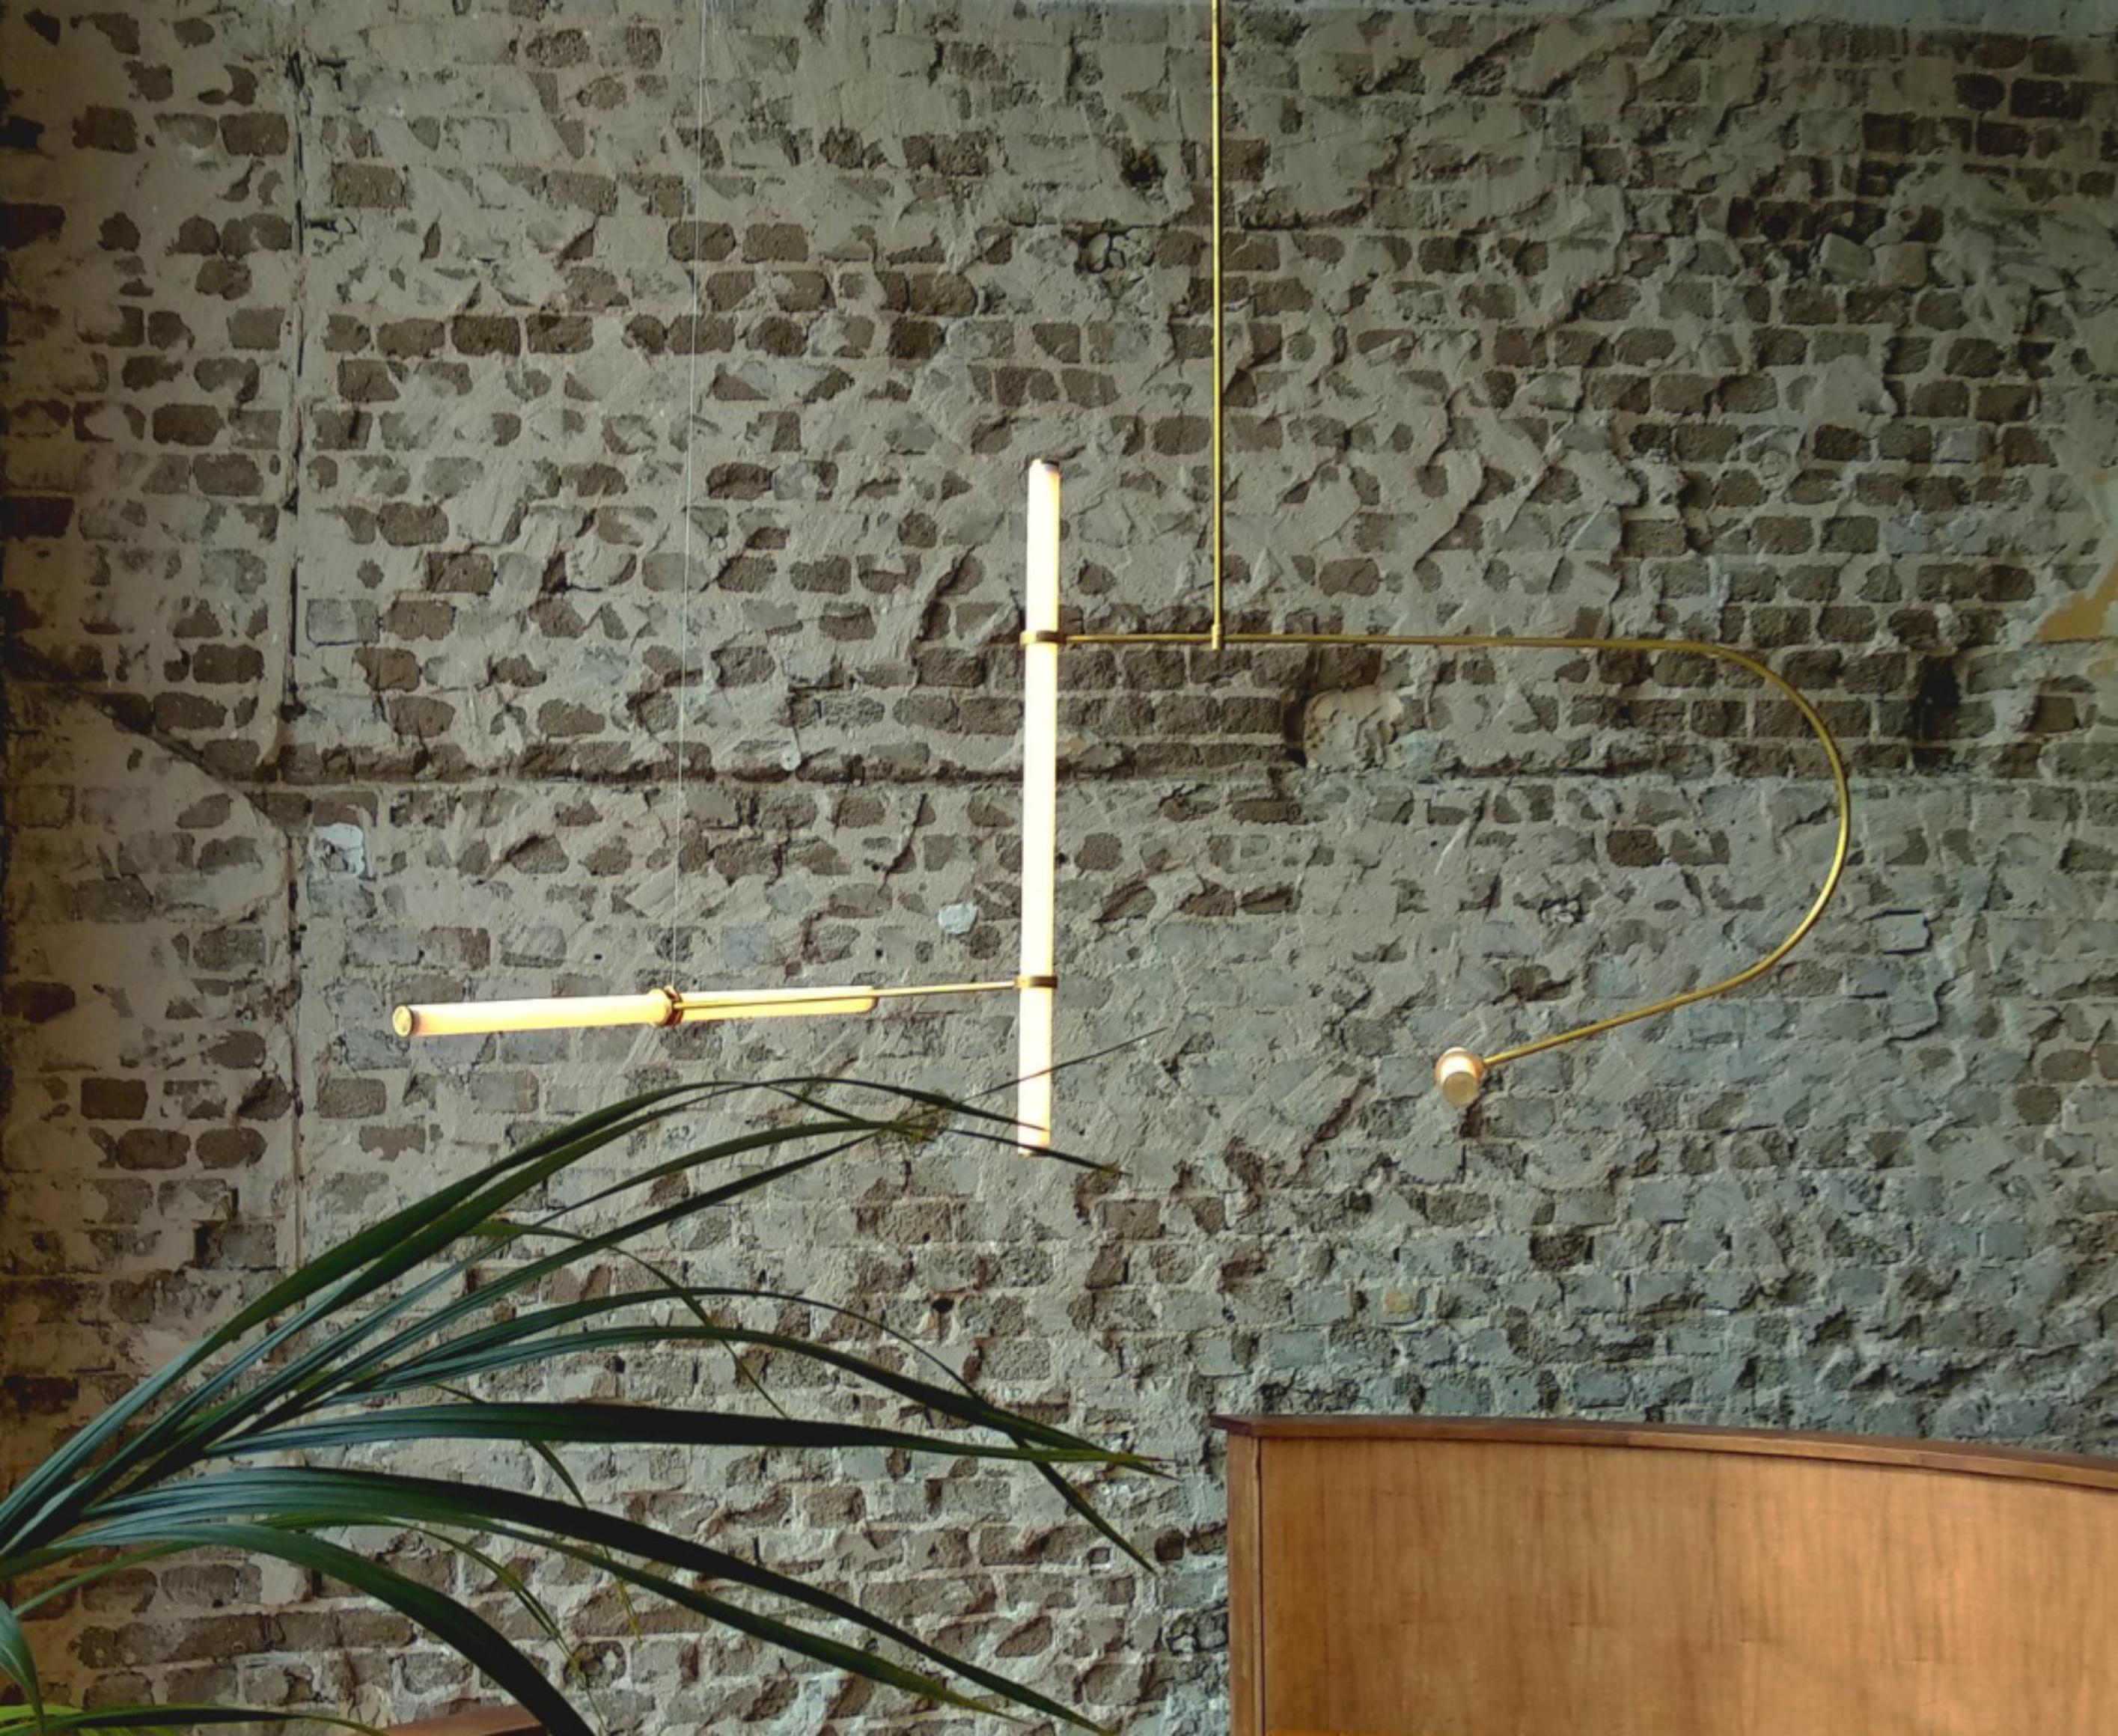 Tube pendant no. 2 by Naama Hofman
Dimensions: 140 x 139 cm (height to order).
Light tube diameter: 35 mm.
Brass pipe diameter: 10 mm.
Materials: Polished brass pipe, acrylic tube, LED lights.

Number of light tubes: 3
Voltage: 110-240.
CE